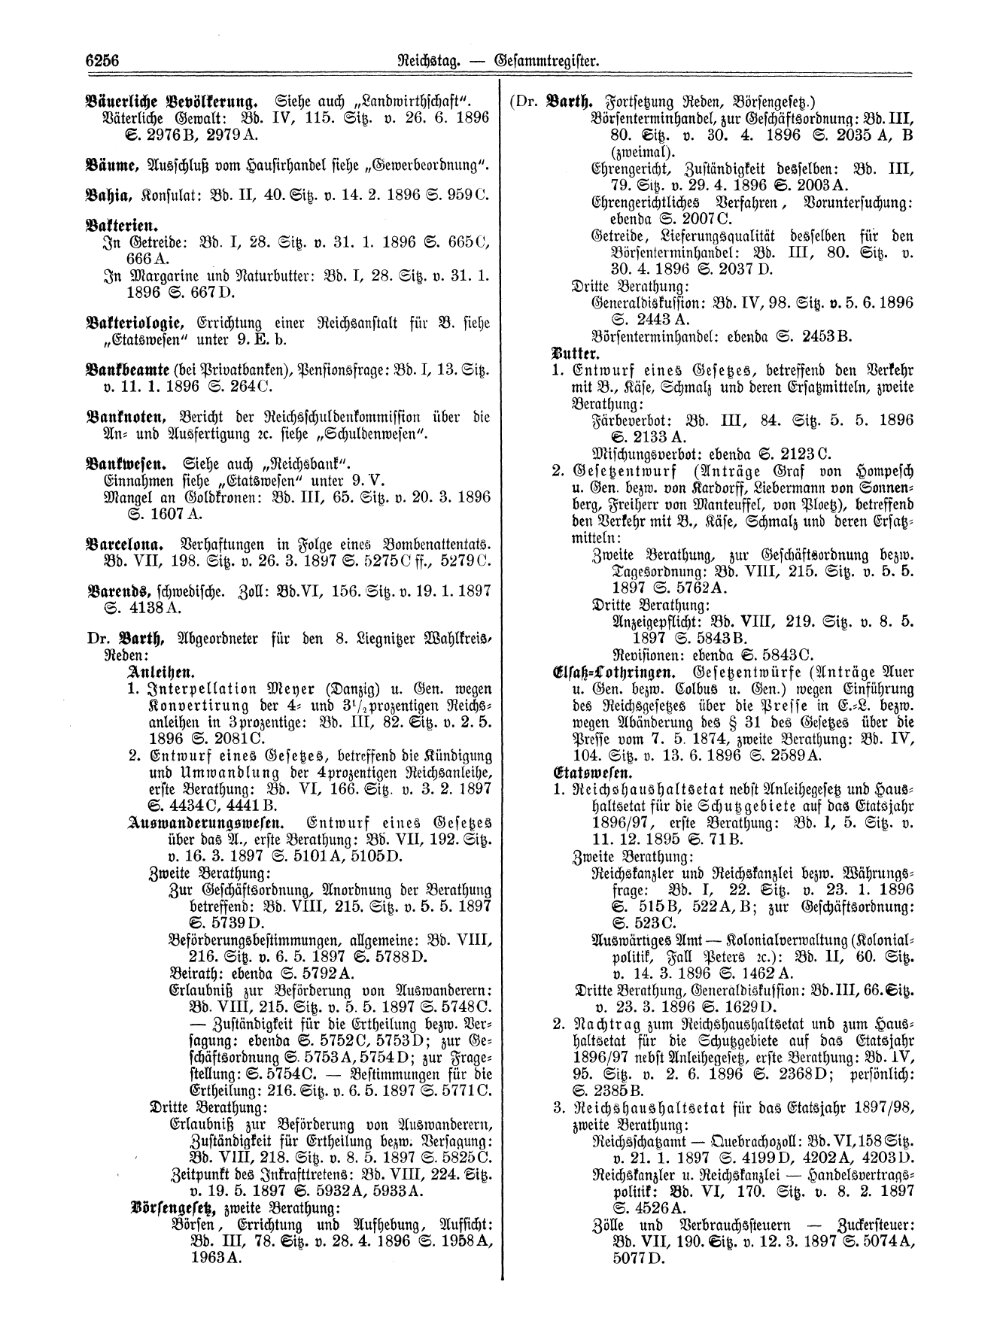 Scan of page 6256